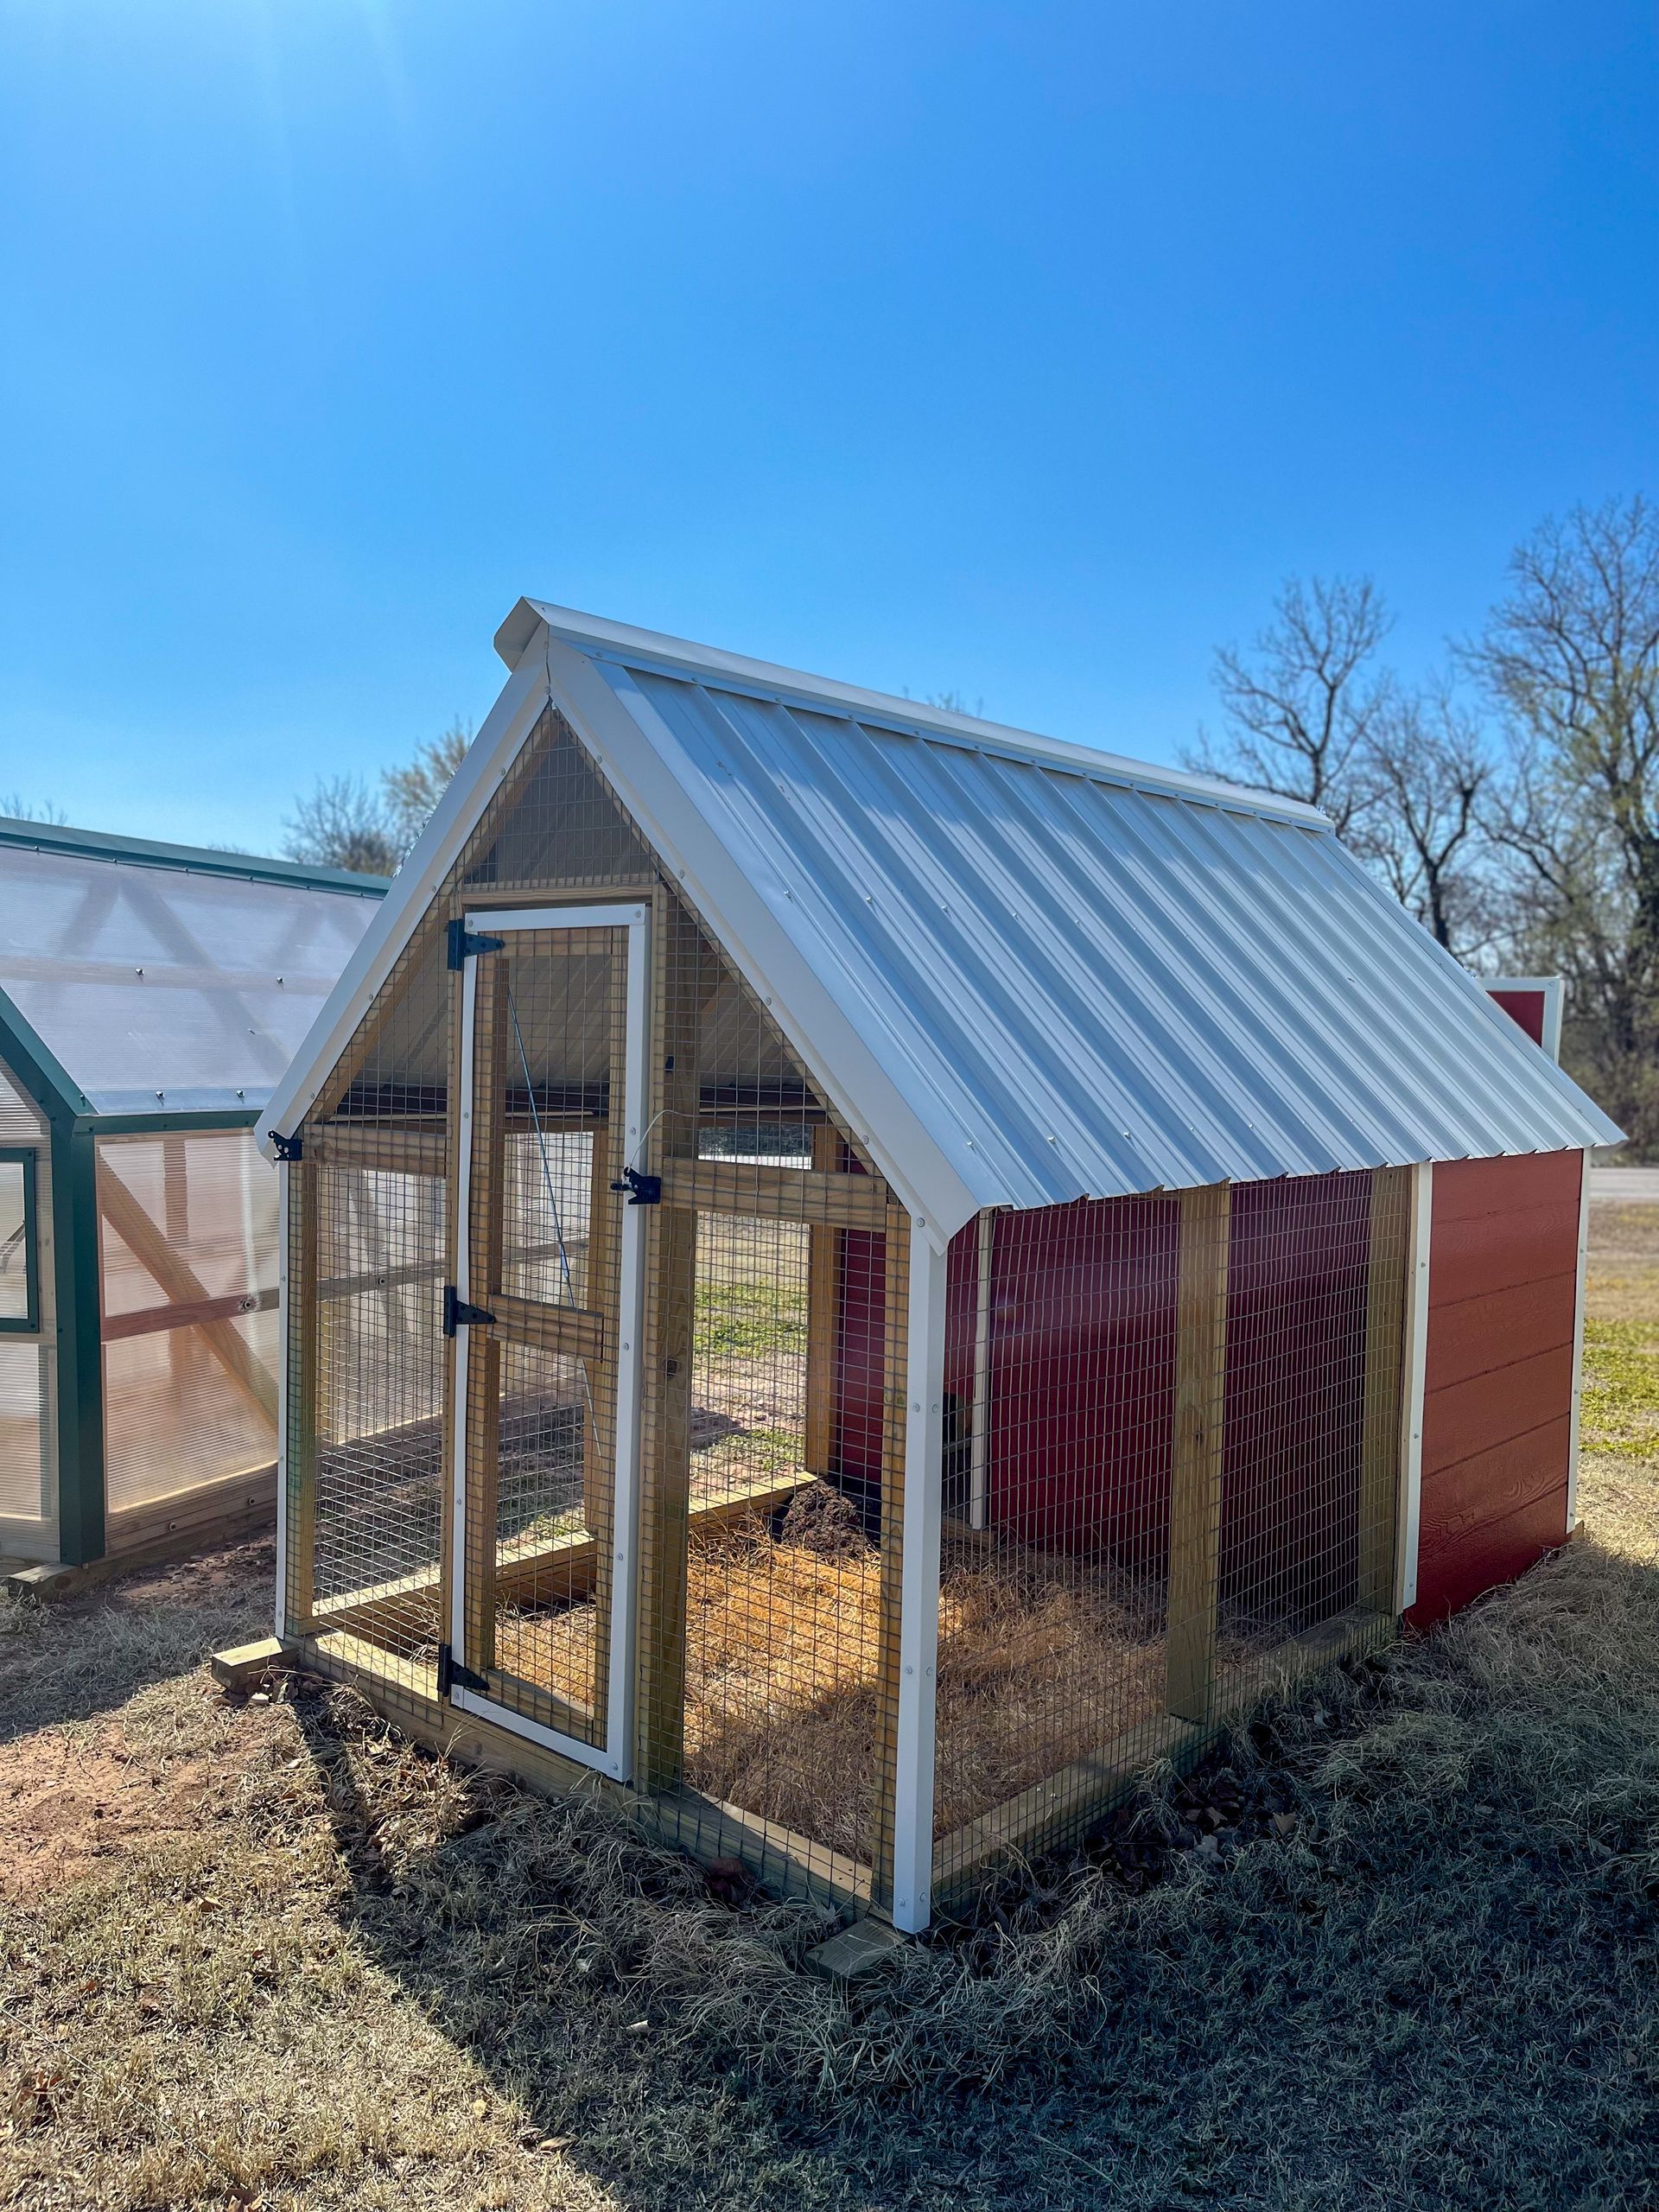 A chicken coop with a metal roof and a greenhouse in the background.